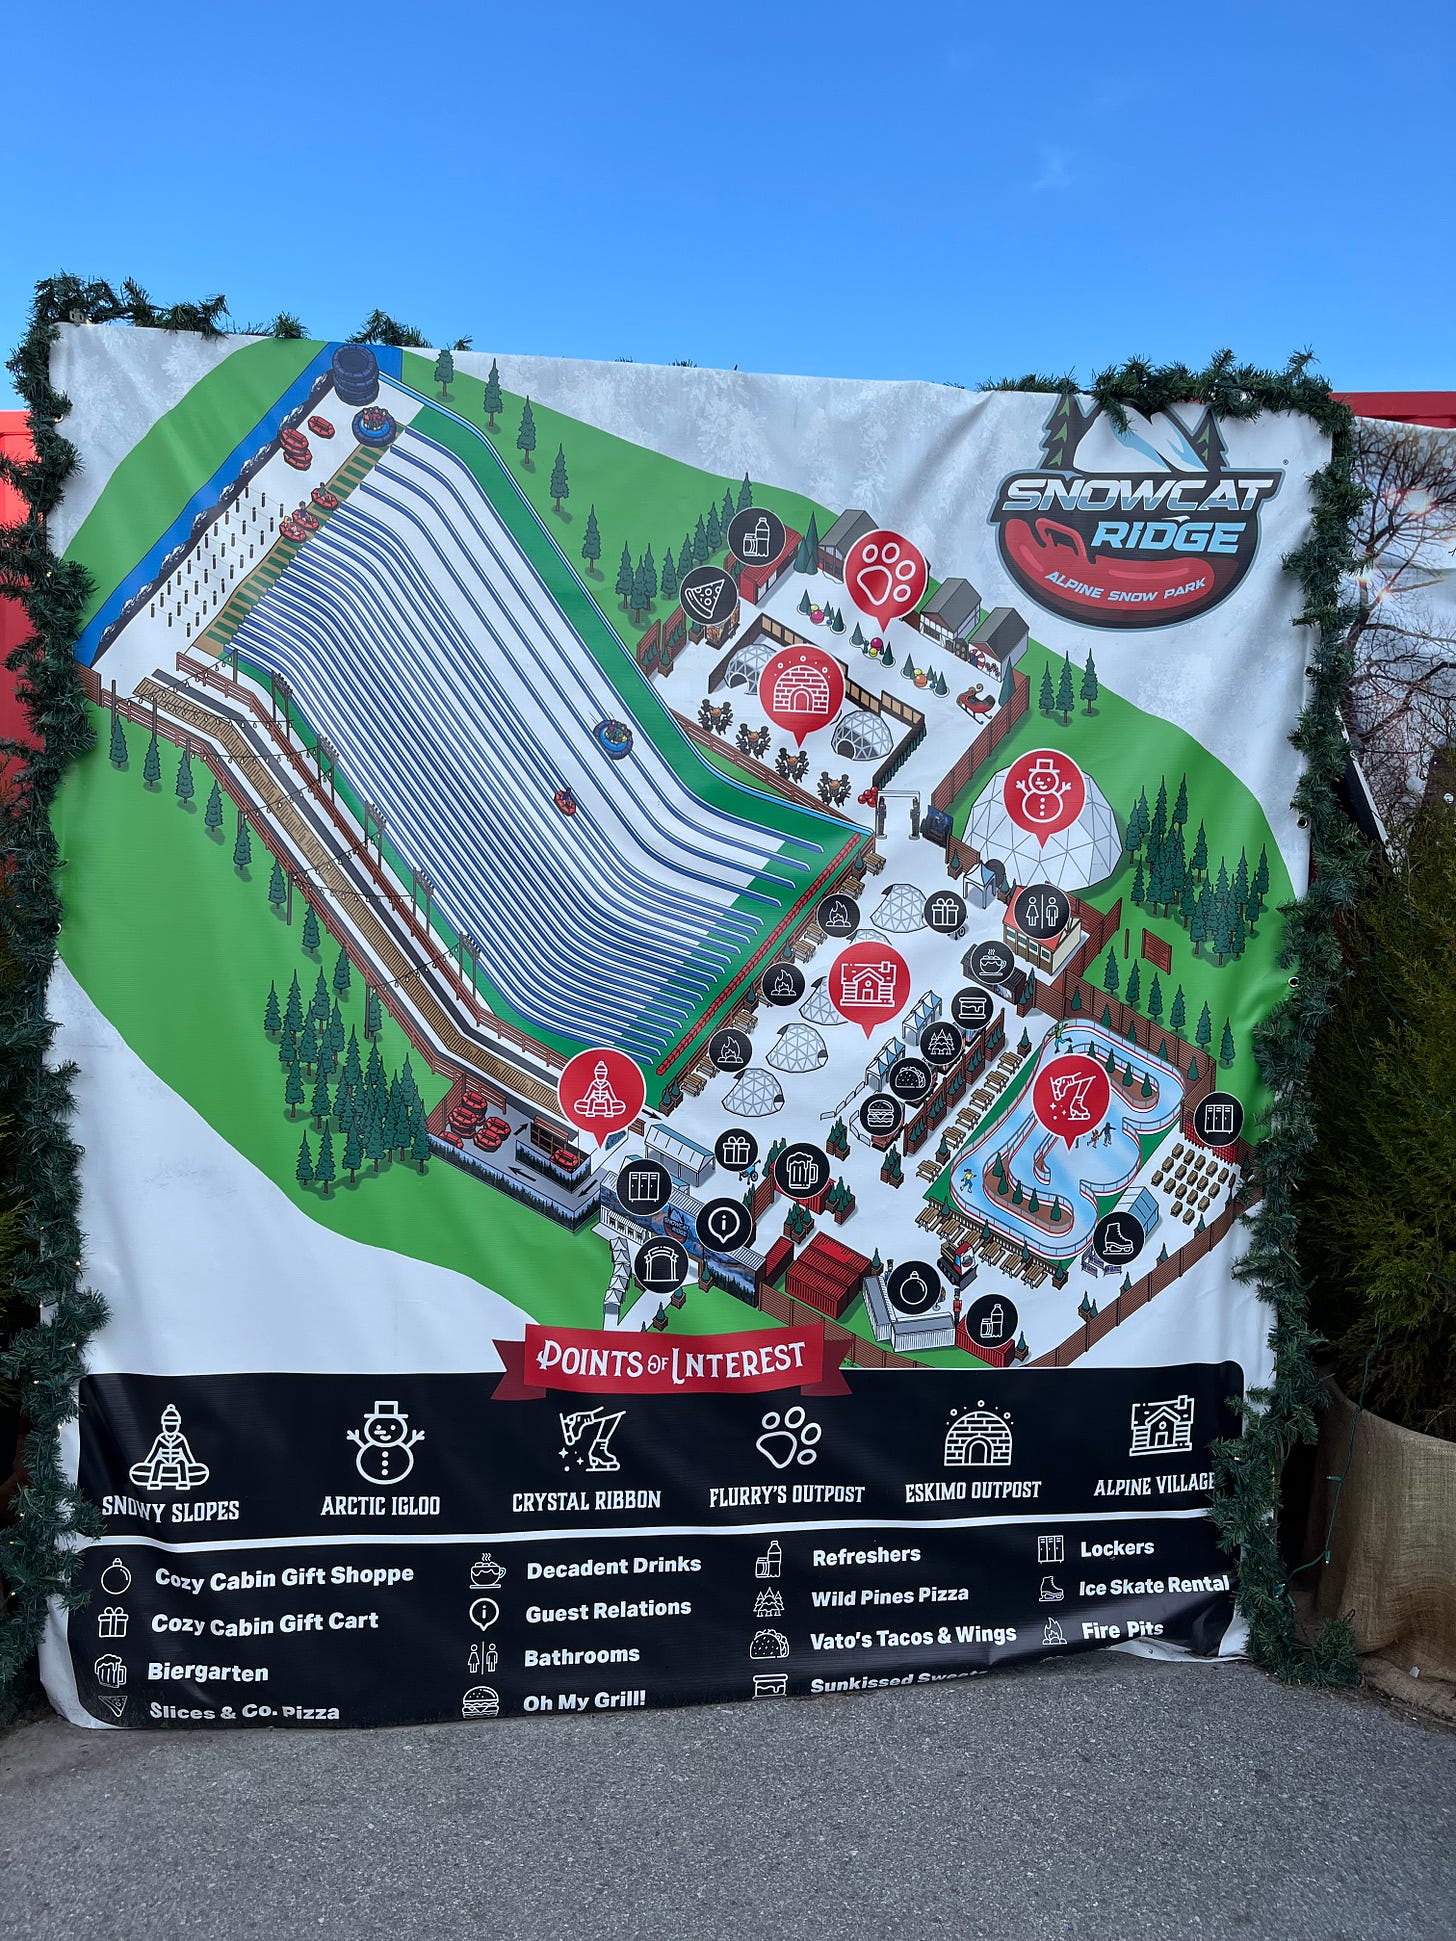 Picture of the map of Snowcat Ridge showing all the major attractions